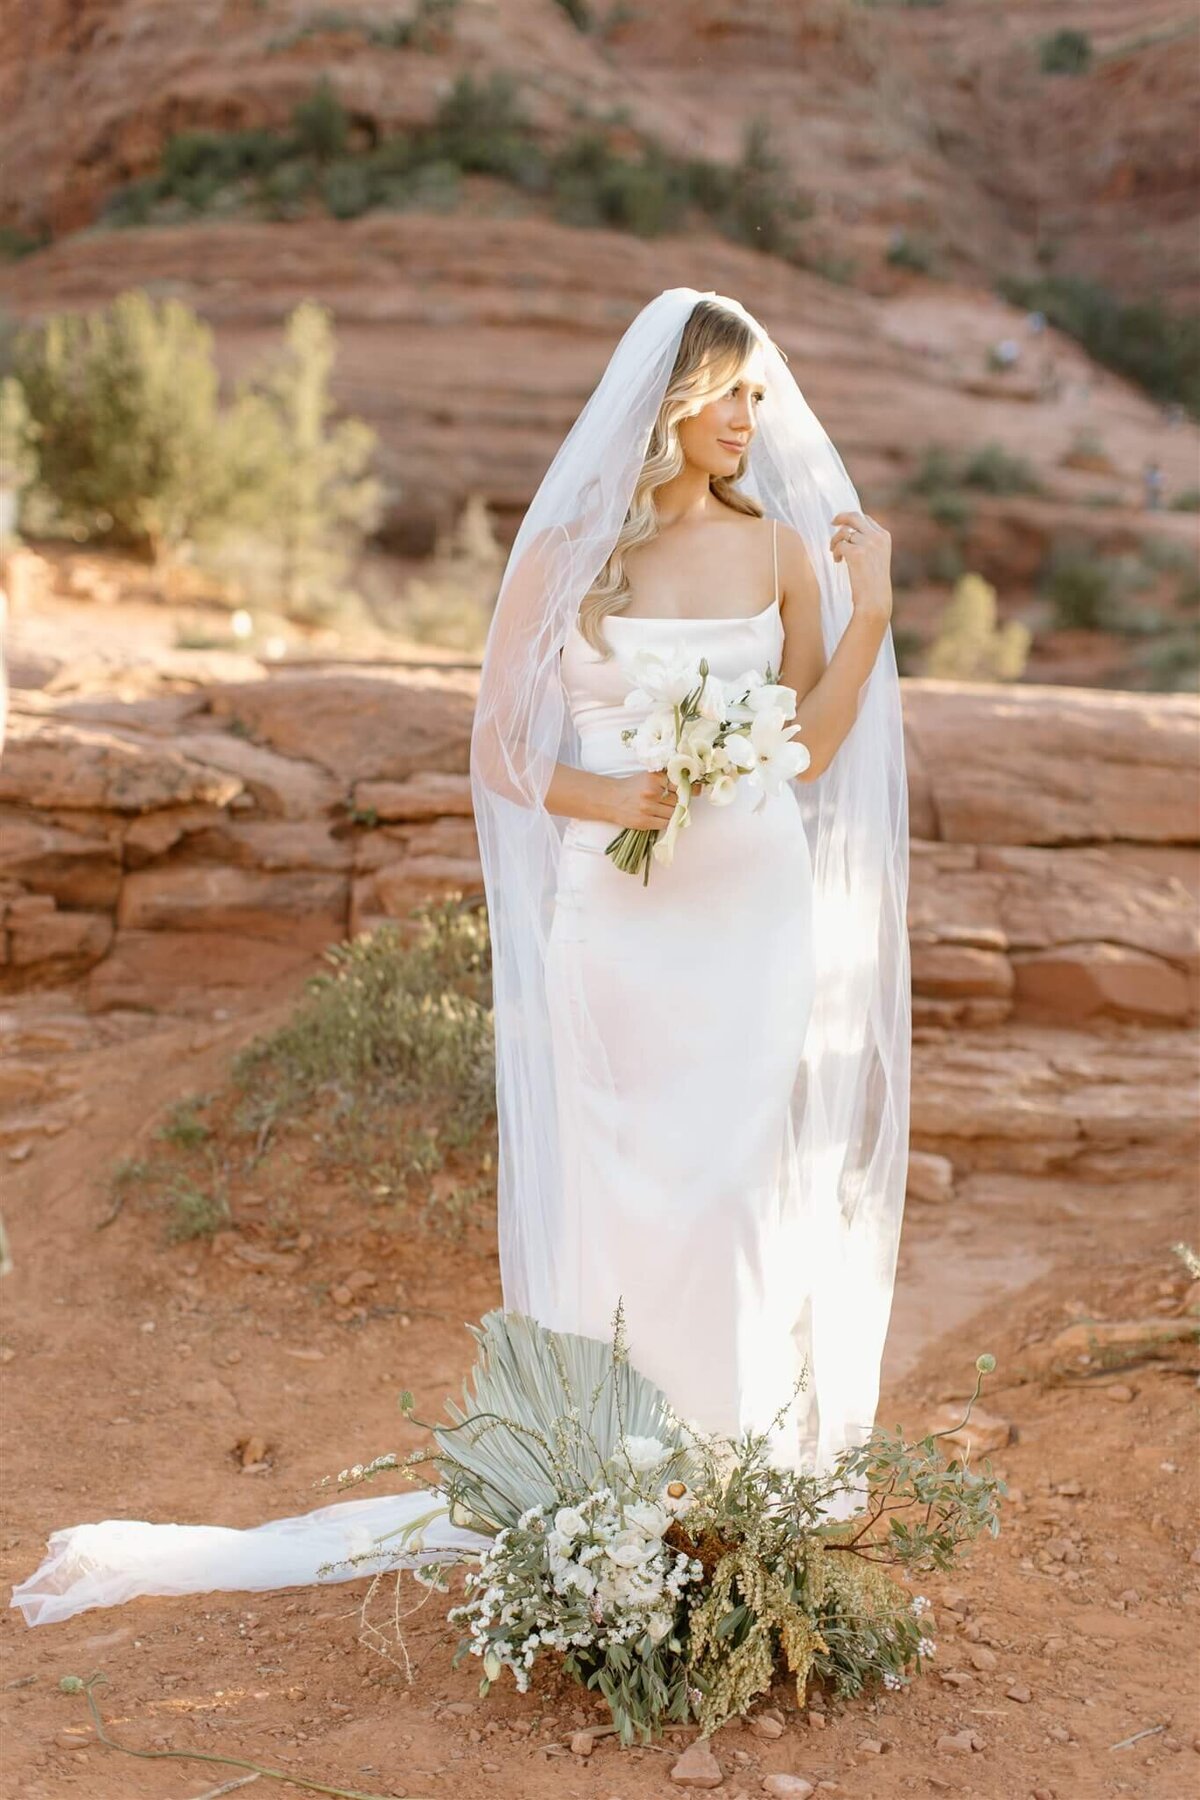 tinted-events-design-and-planning-sedona-wedding-urban-desert-flora-photography-memories-by-lindsay-destination-wedding-planning-tintedevents.com